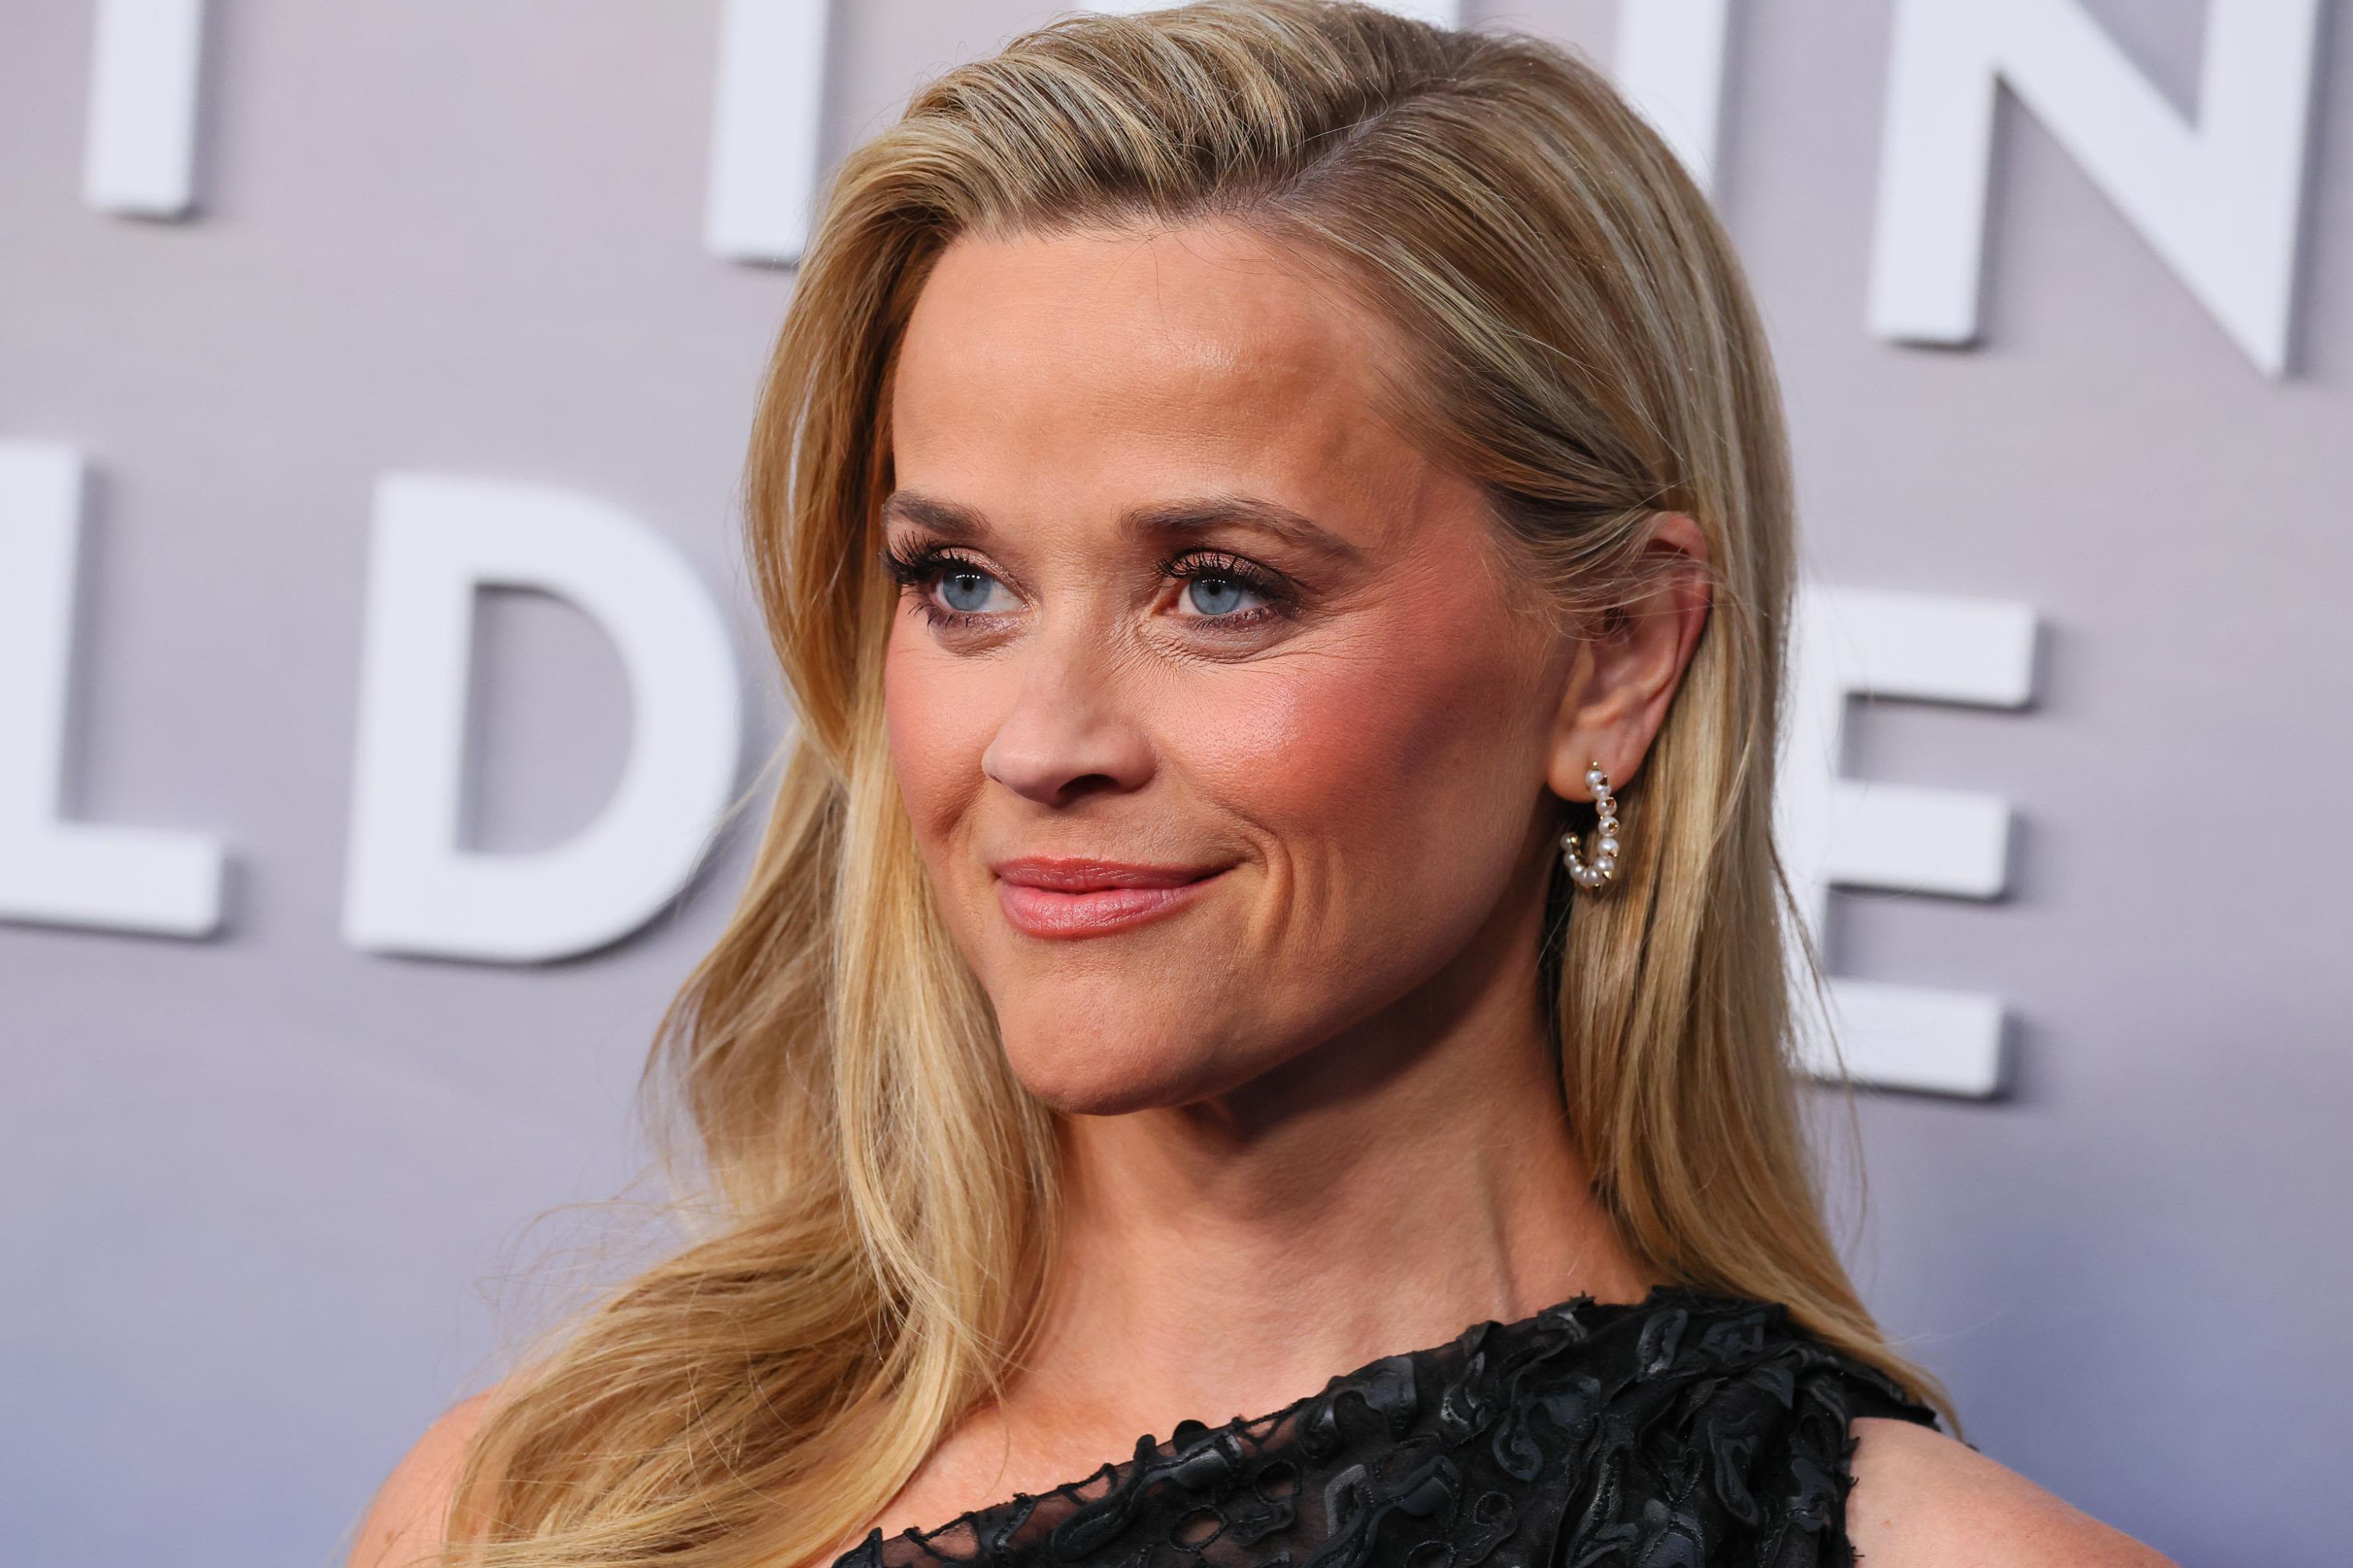 Reese Witherspoon sells her fashion brand, Draper James